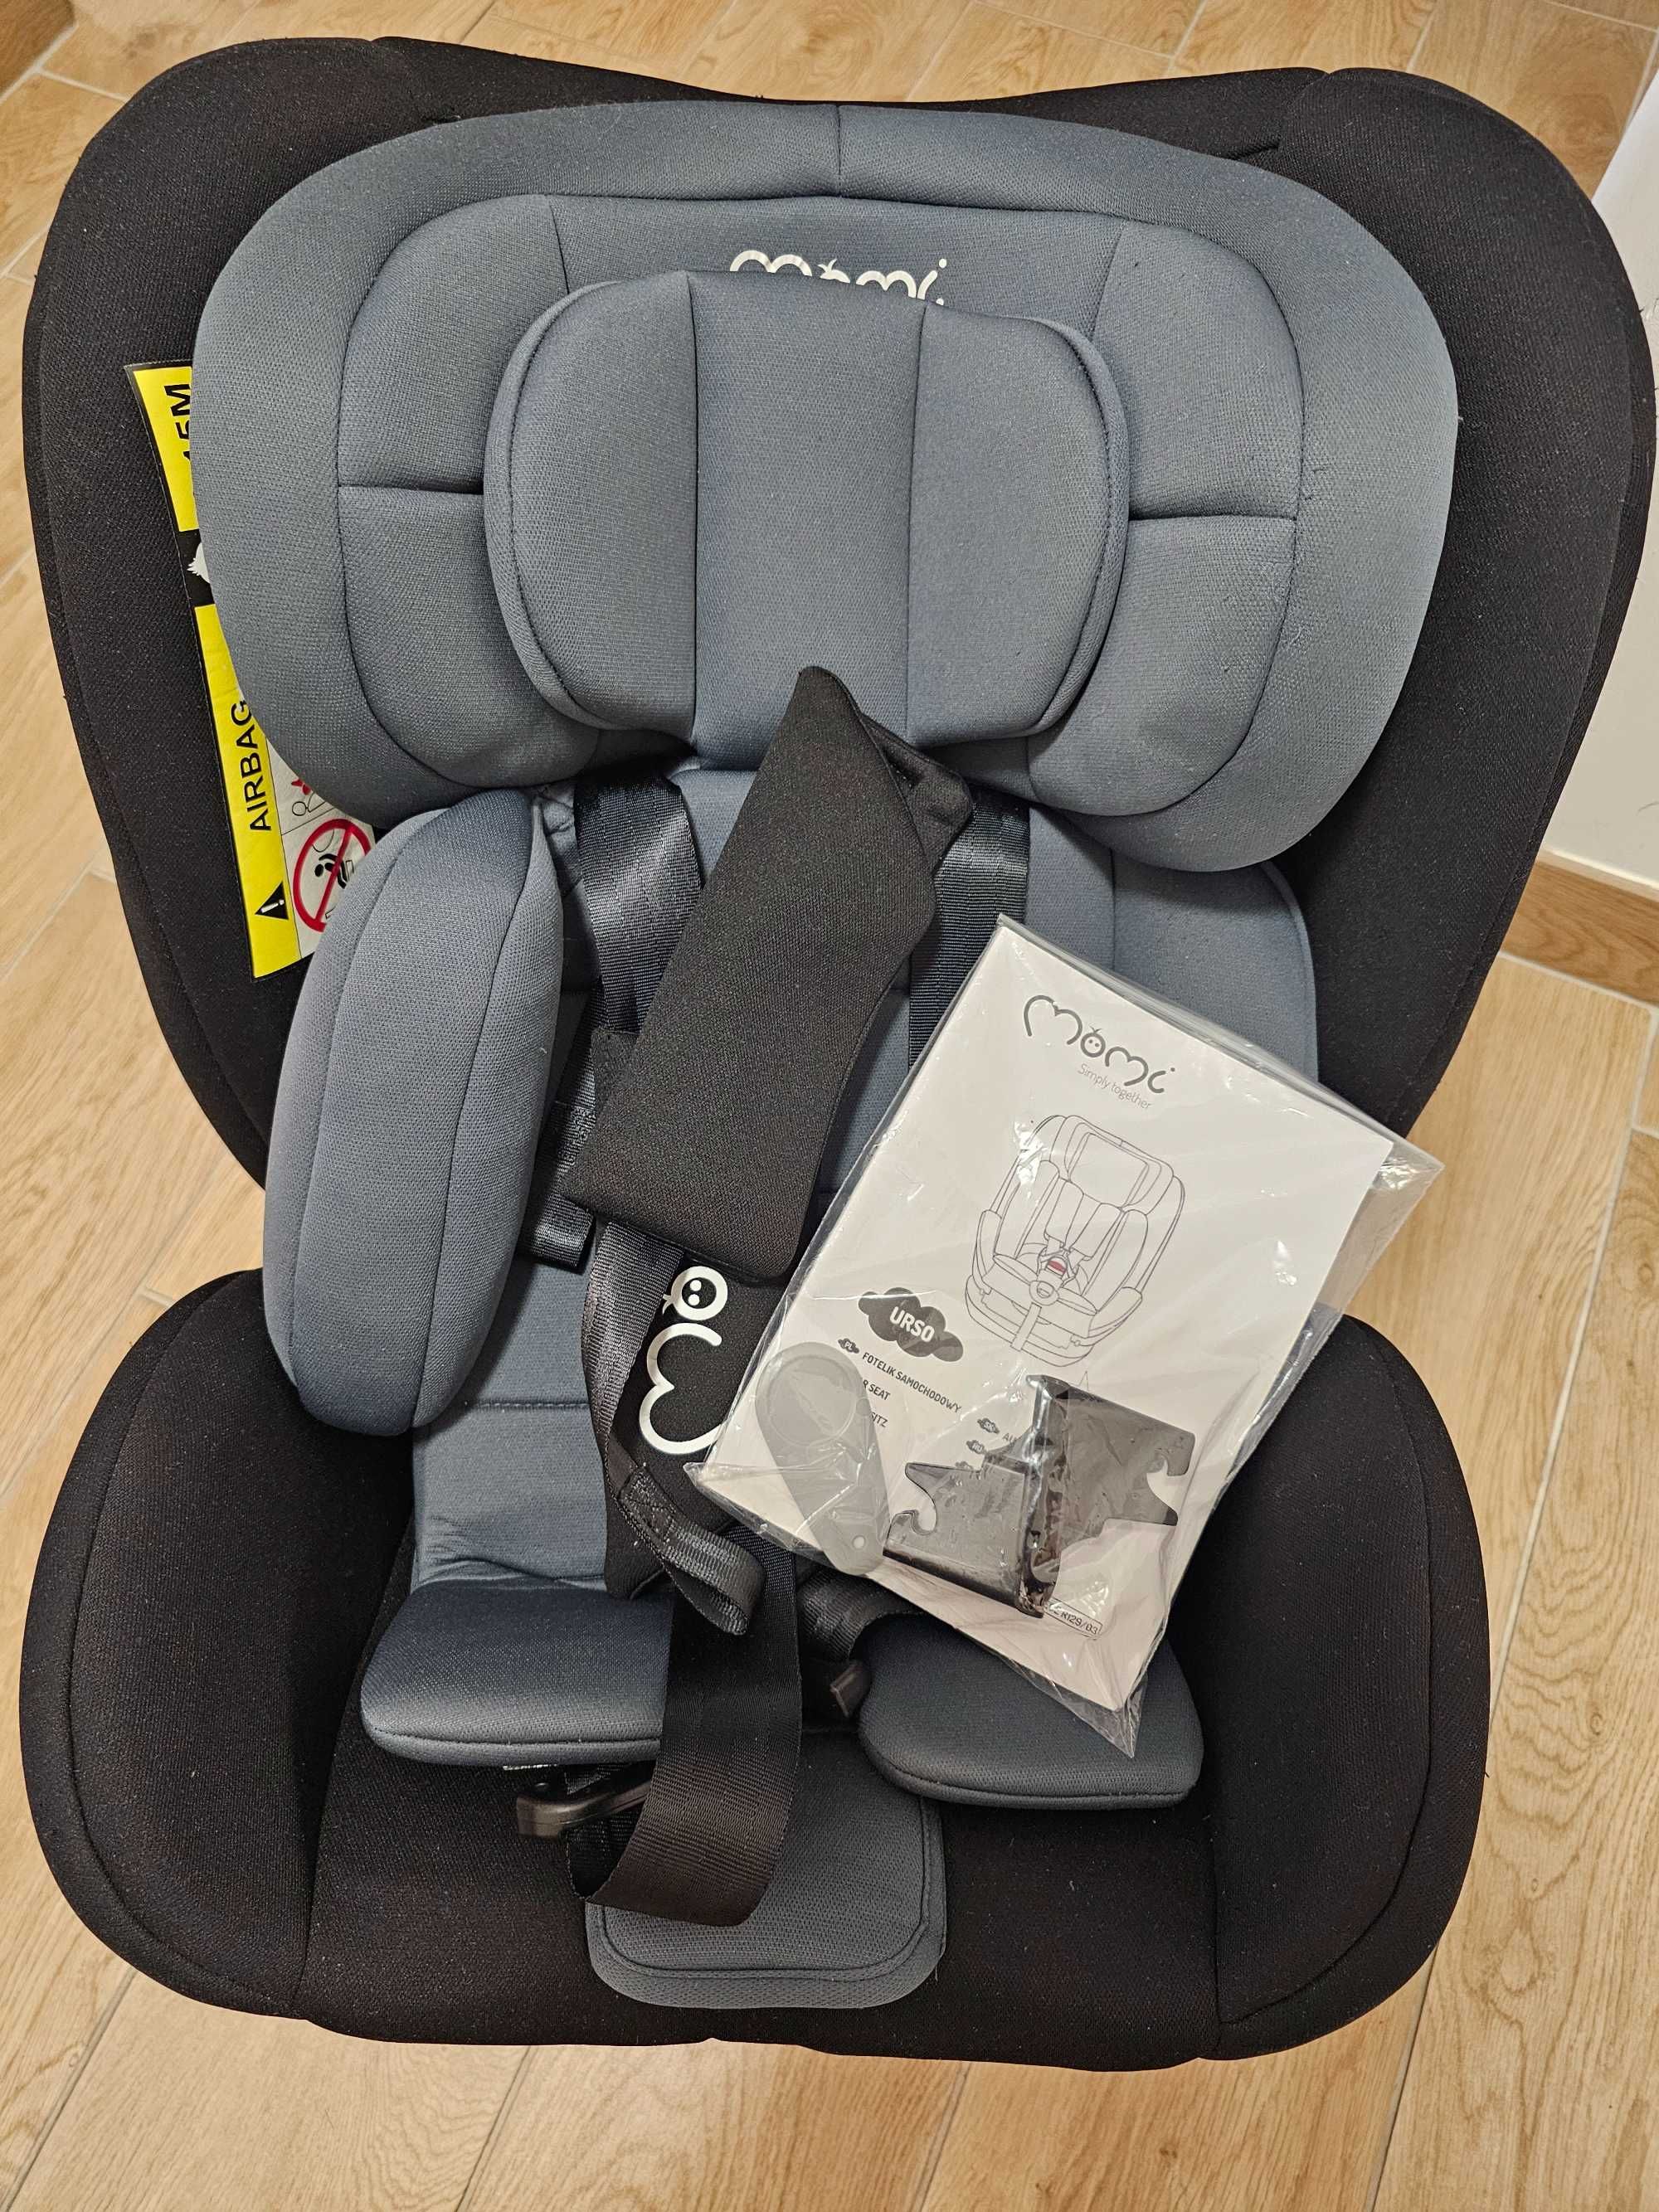 Items for baby-bed, car seat and so on